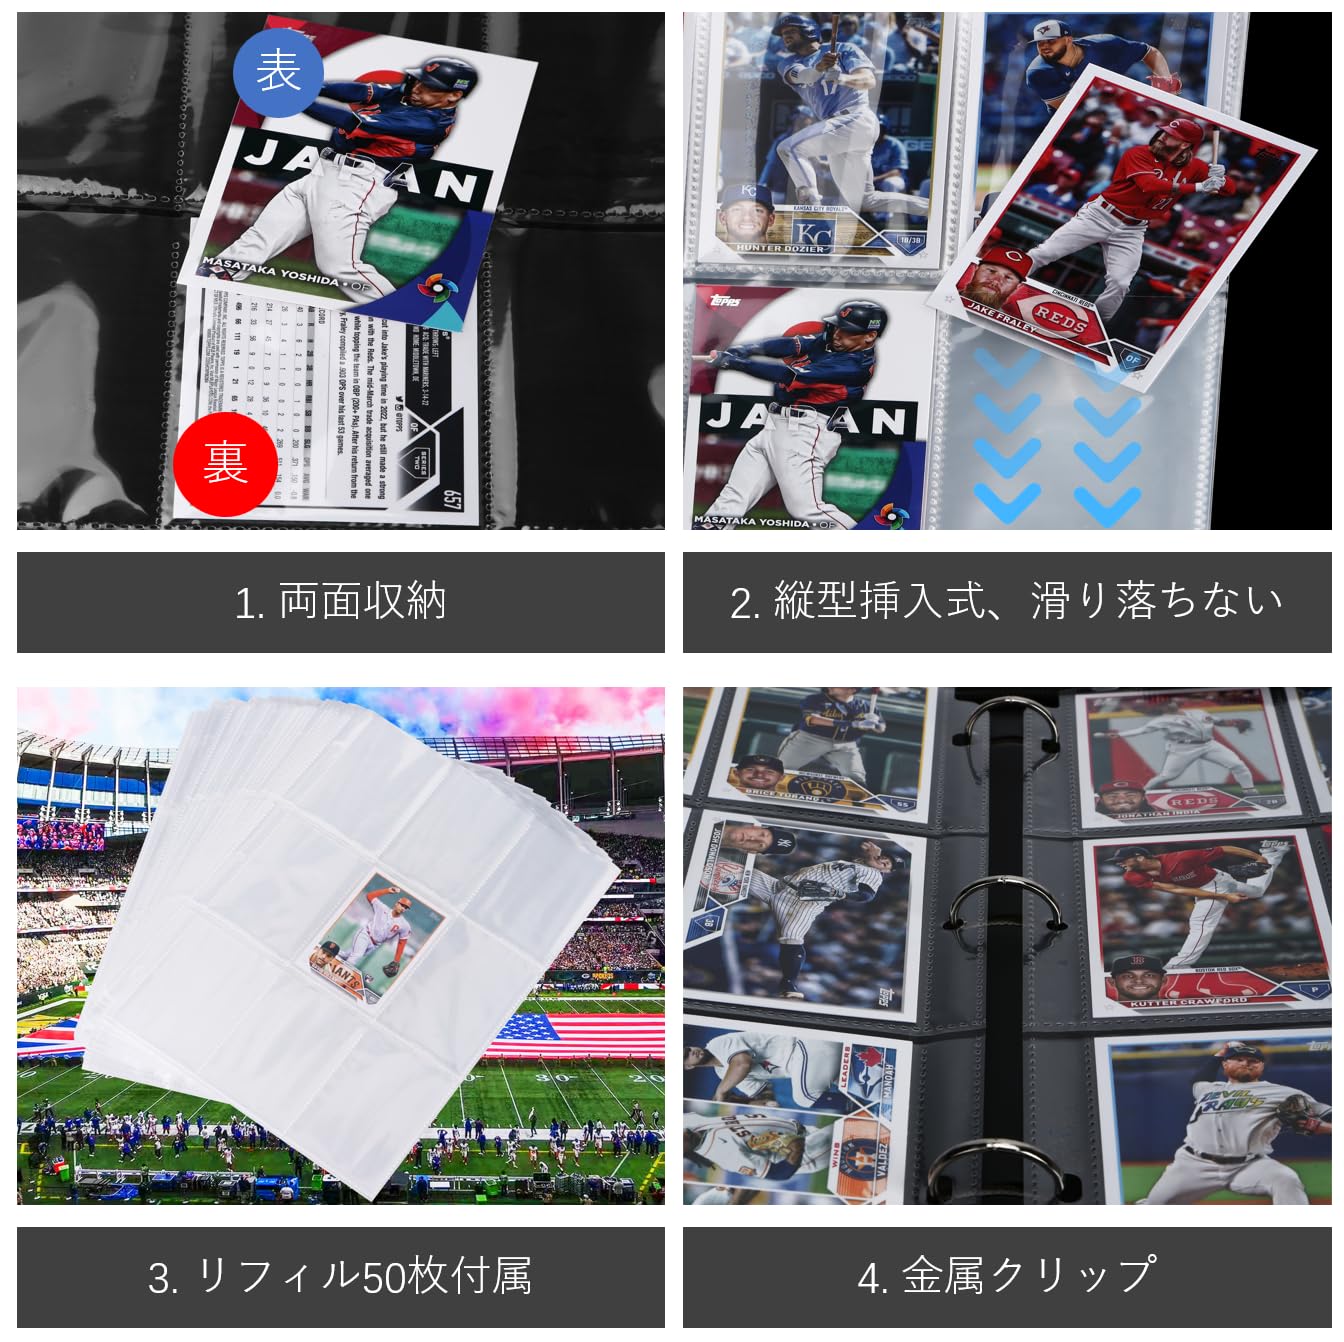  card file card album trading card file Professional Baseball card 9 pocket refill 50 sheets attached 900 sheets high capacity collection sleeve correspondence fastener 